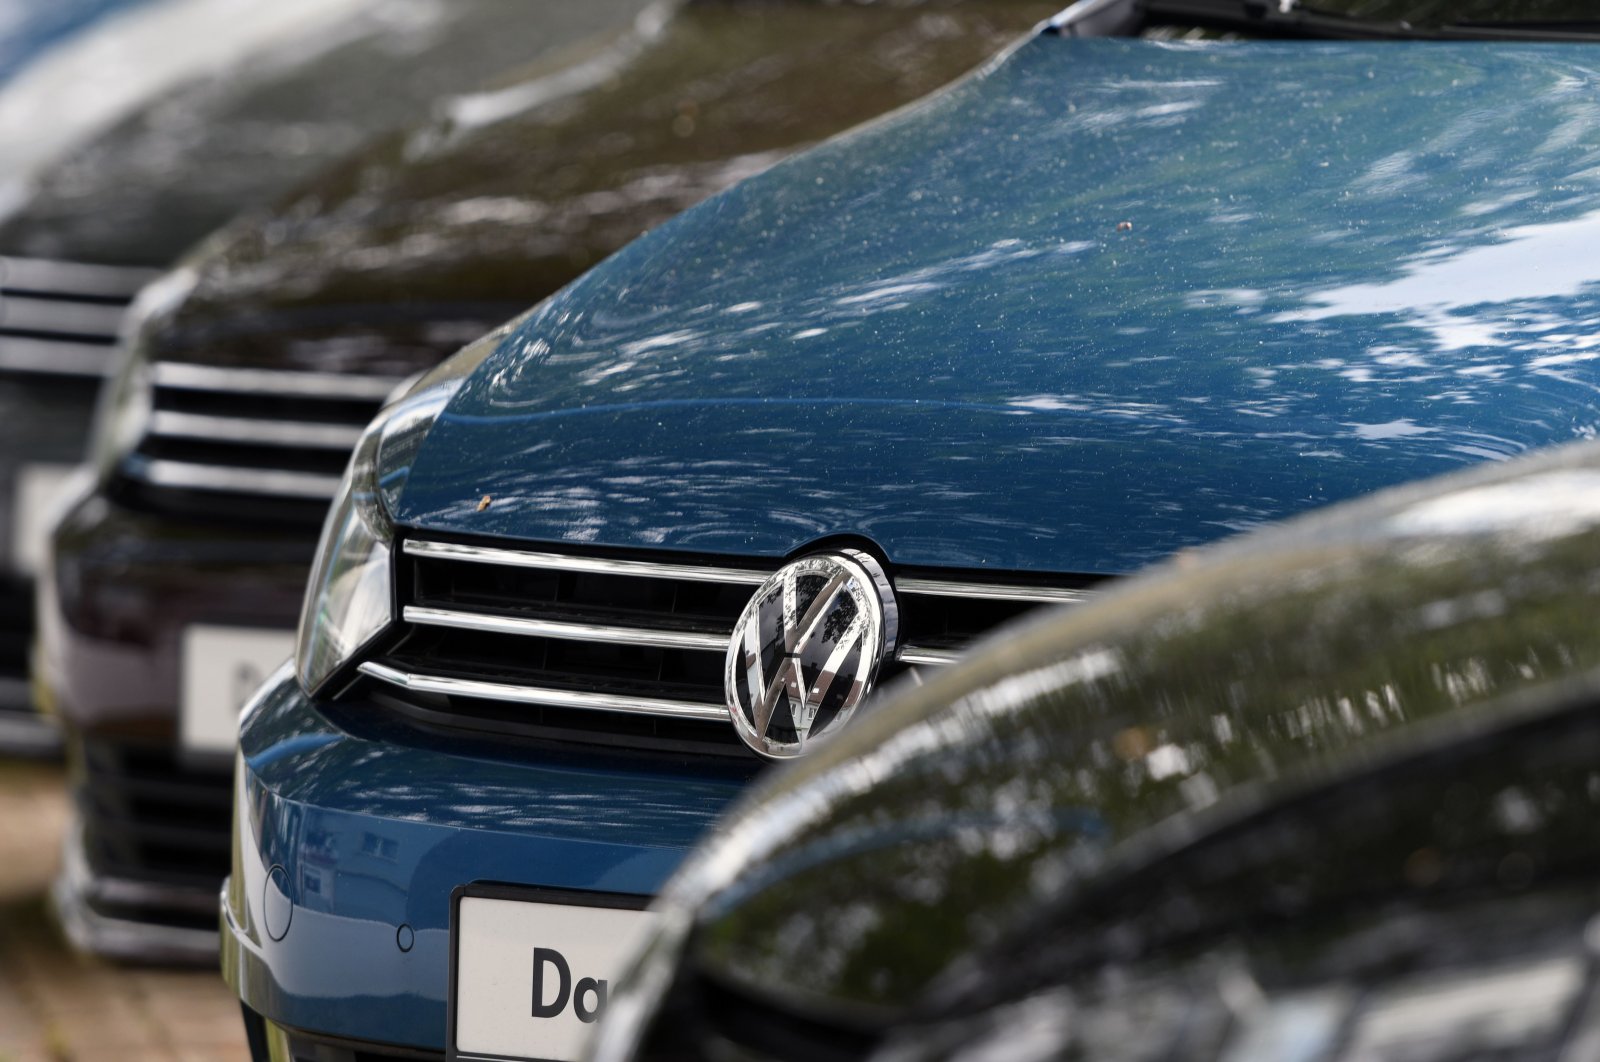 Used cars of German carmaker Volkswagen (VW) are for sale at a car dealer in Hamm, western Germany, May 25, 2020. (AFP Photo)